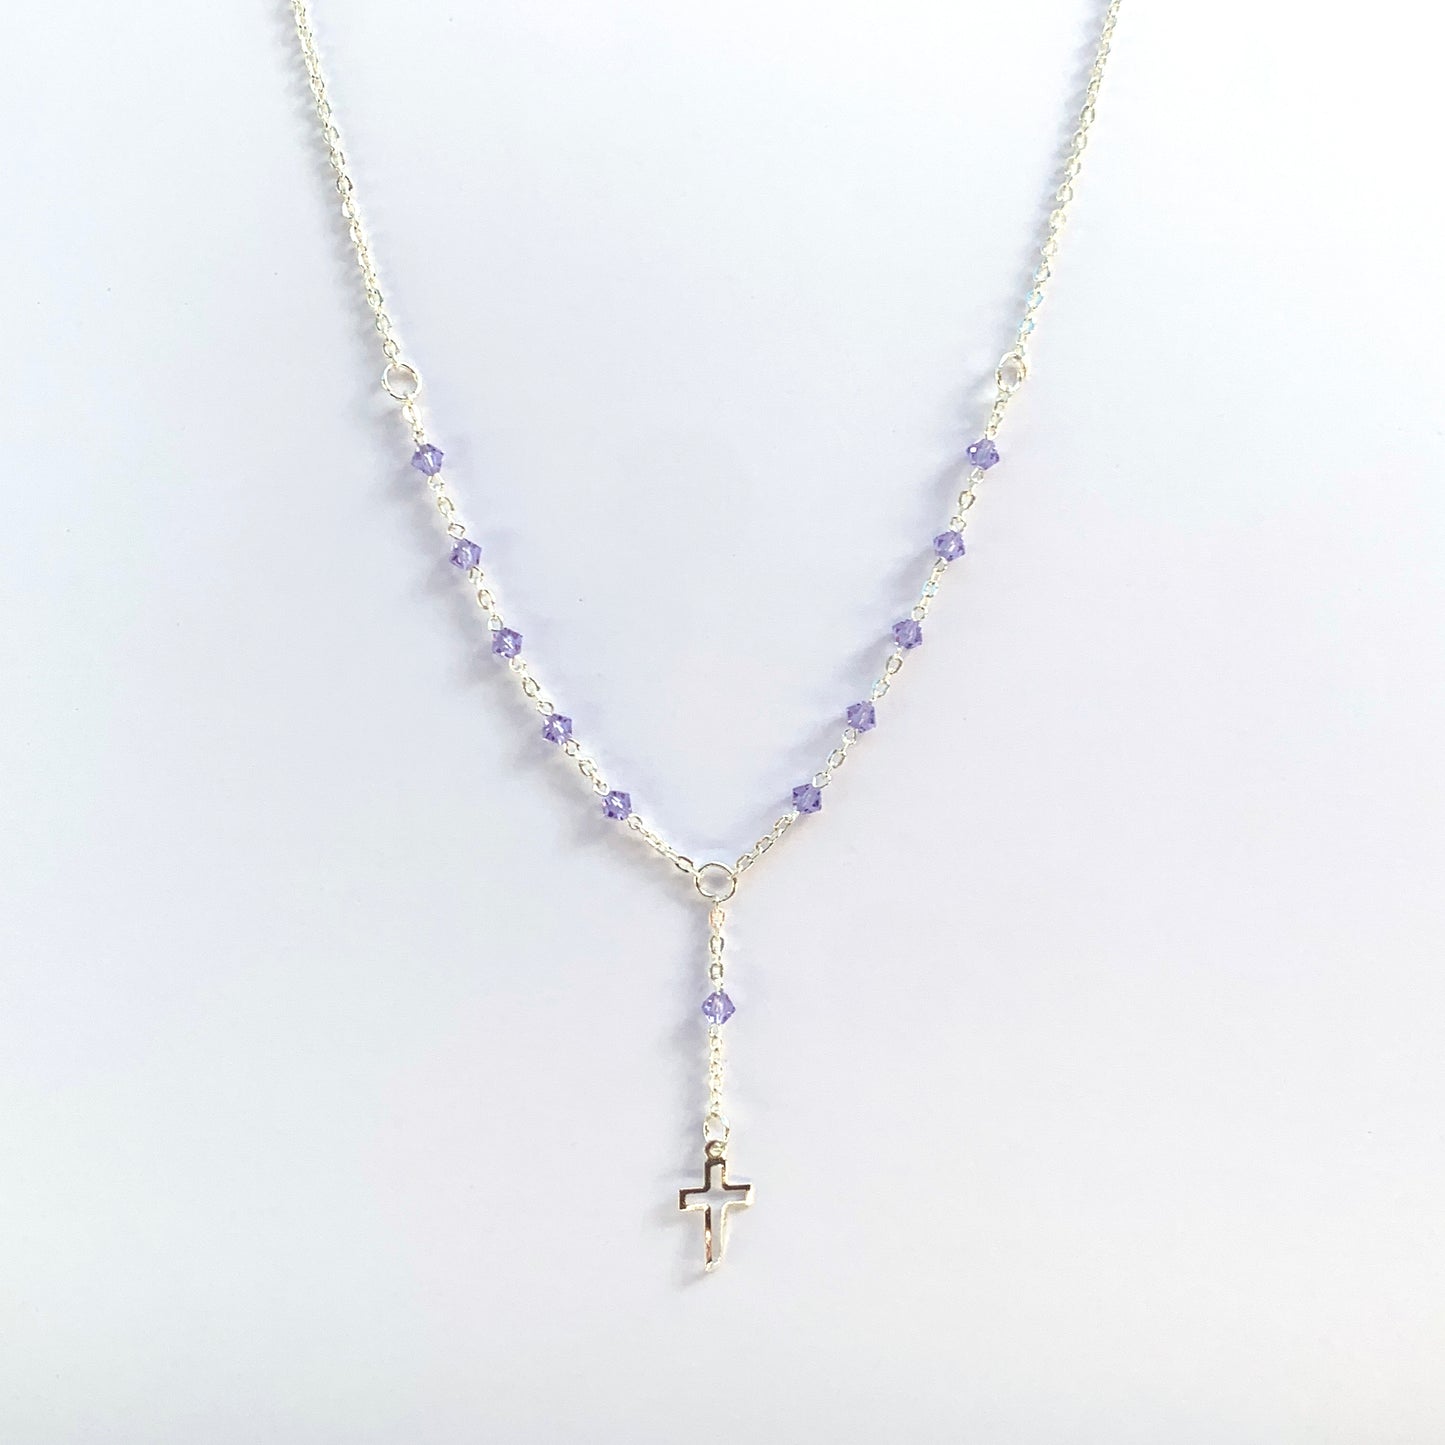 Silver and Crystal Decade Rosary Necklace of Assorted Colors